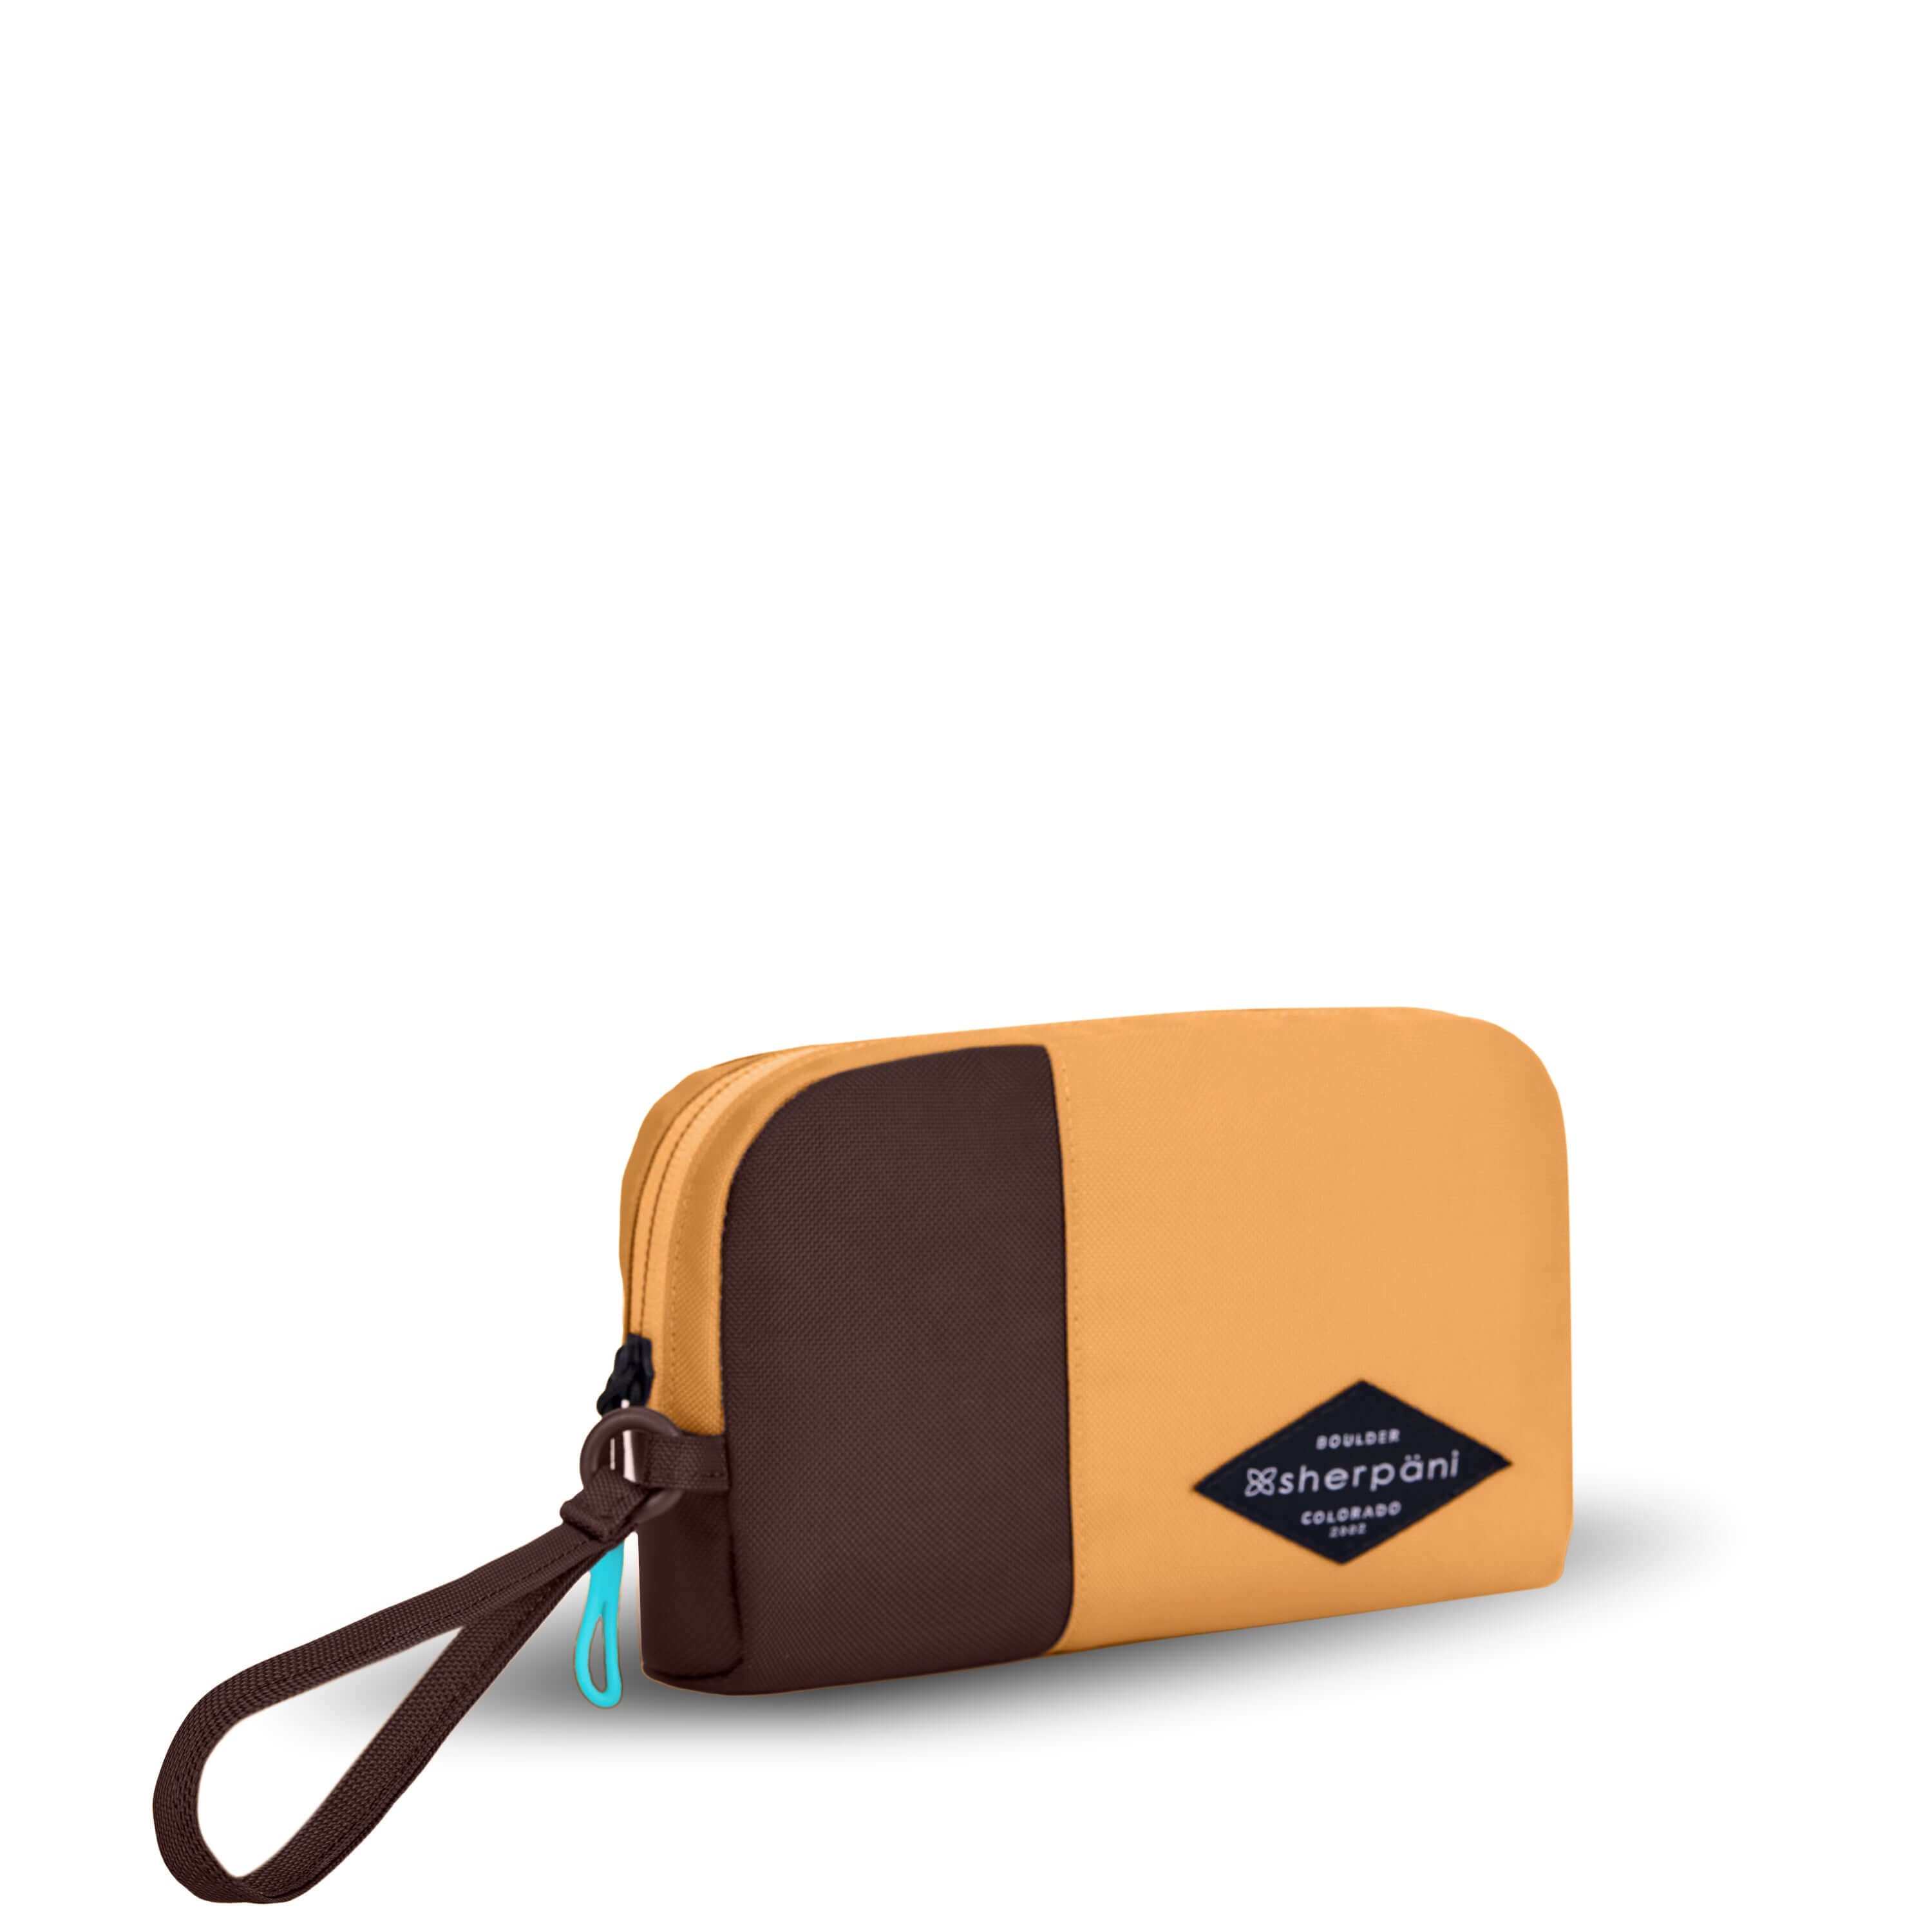 Angled front view of Sherpani travel accessory, the Jolie in Sundial, in small size. The pouch is two-toned in burnt yellow and brown. It features a brown wristlet strap and an easy-pull zipper accented in aqua. 